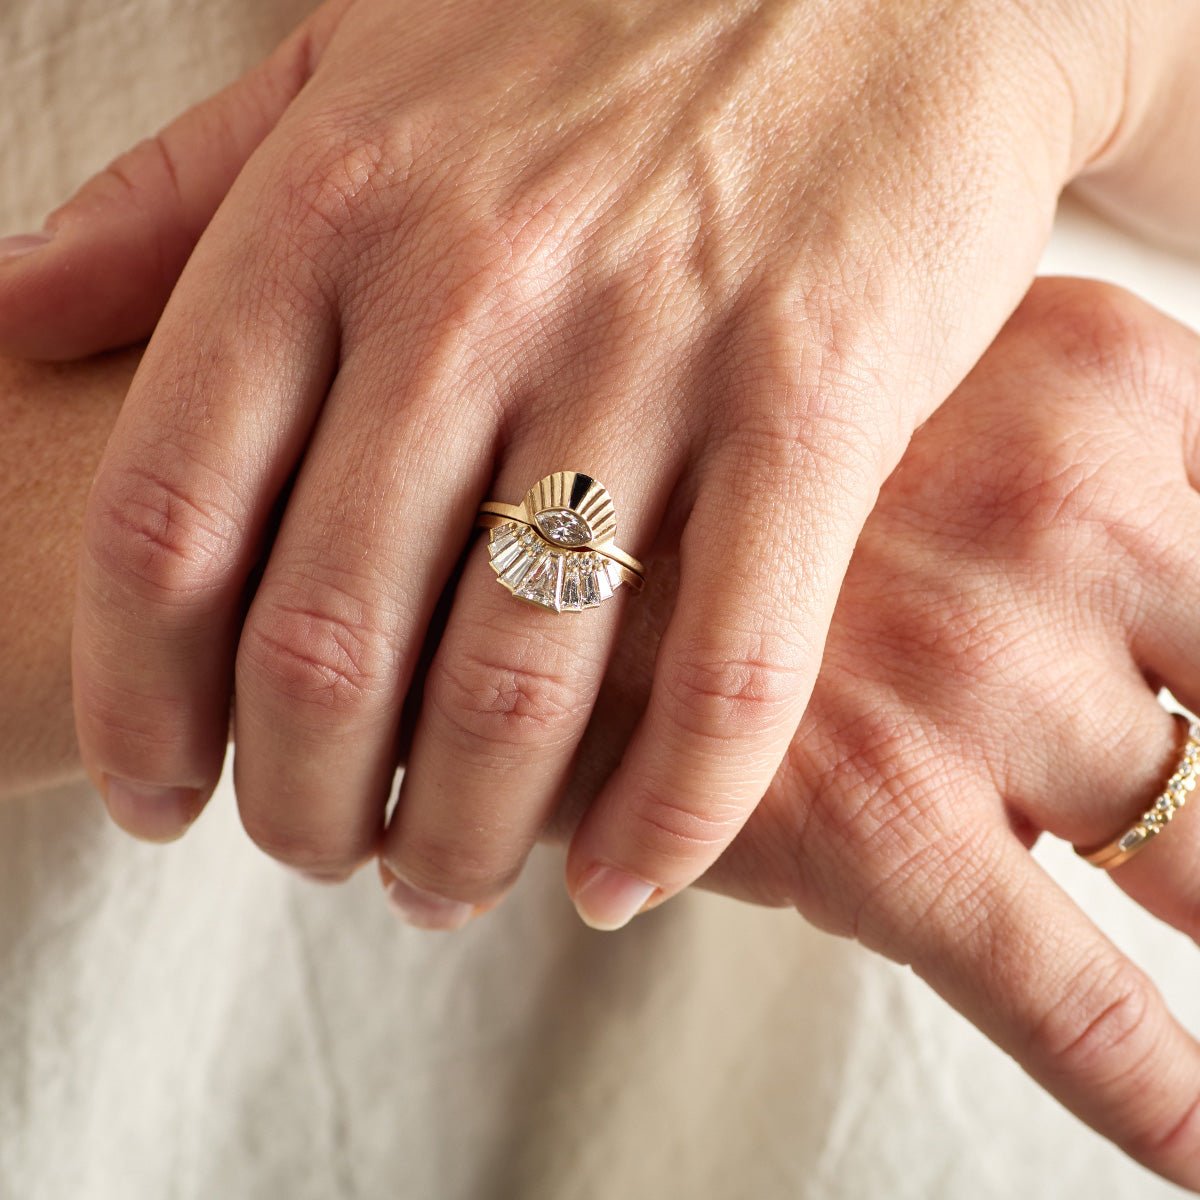 Model wears Aestus and Apricus rings on their left hand. Briefly shown on their right hand are the Alma and Itero rings. All rings are made of 14K recycled gold and made in Portland, Oregon.